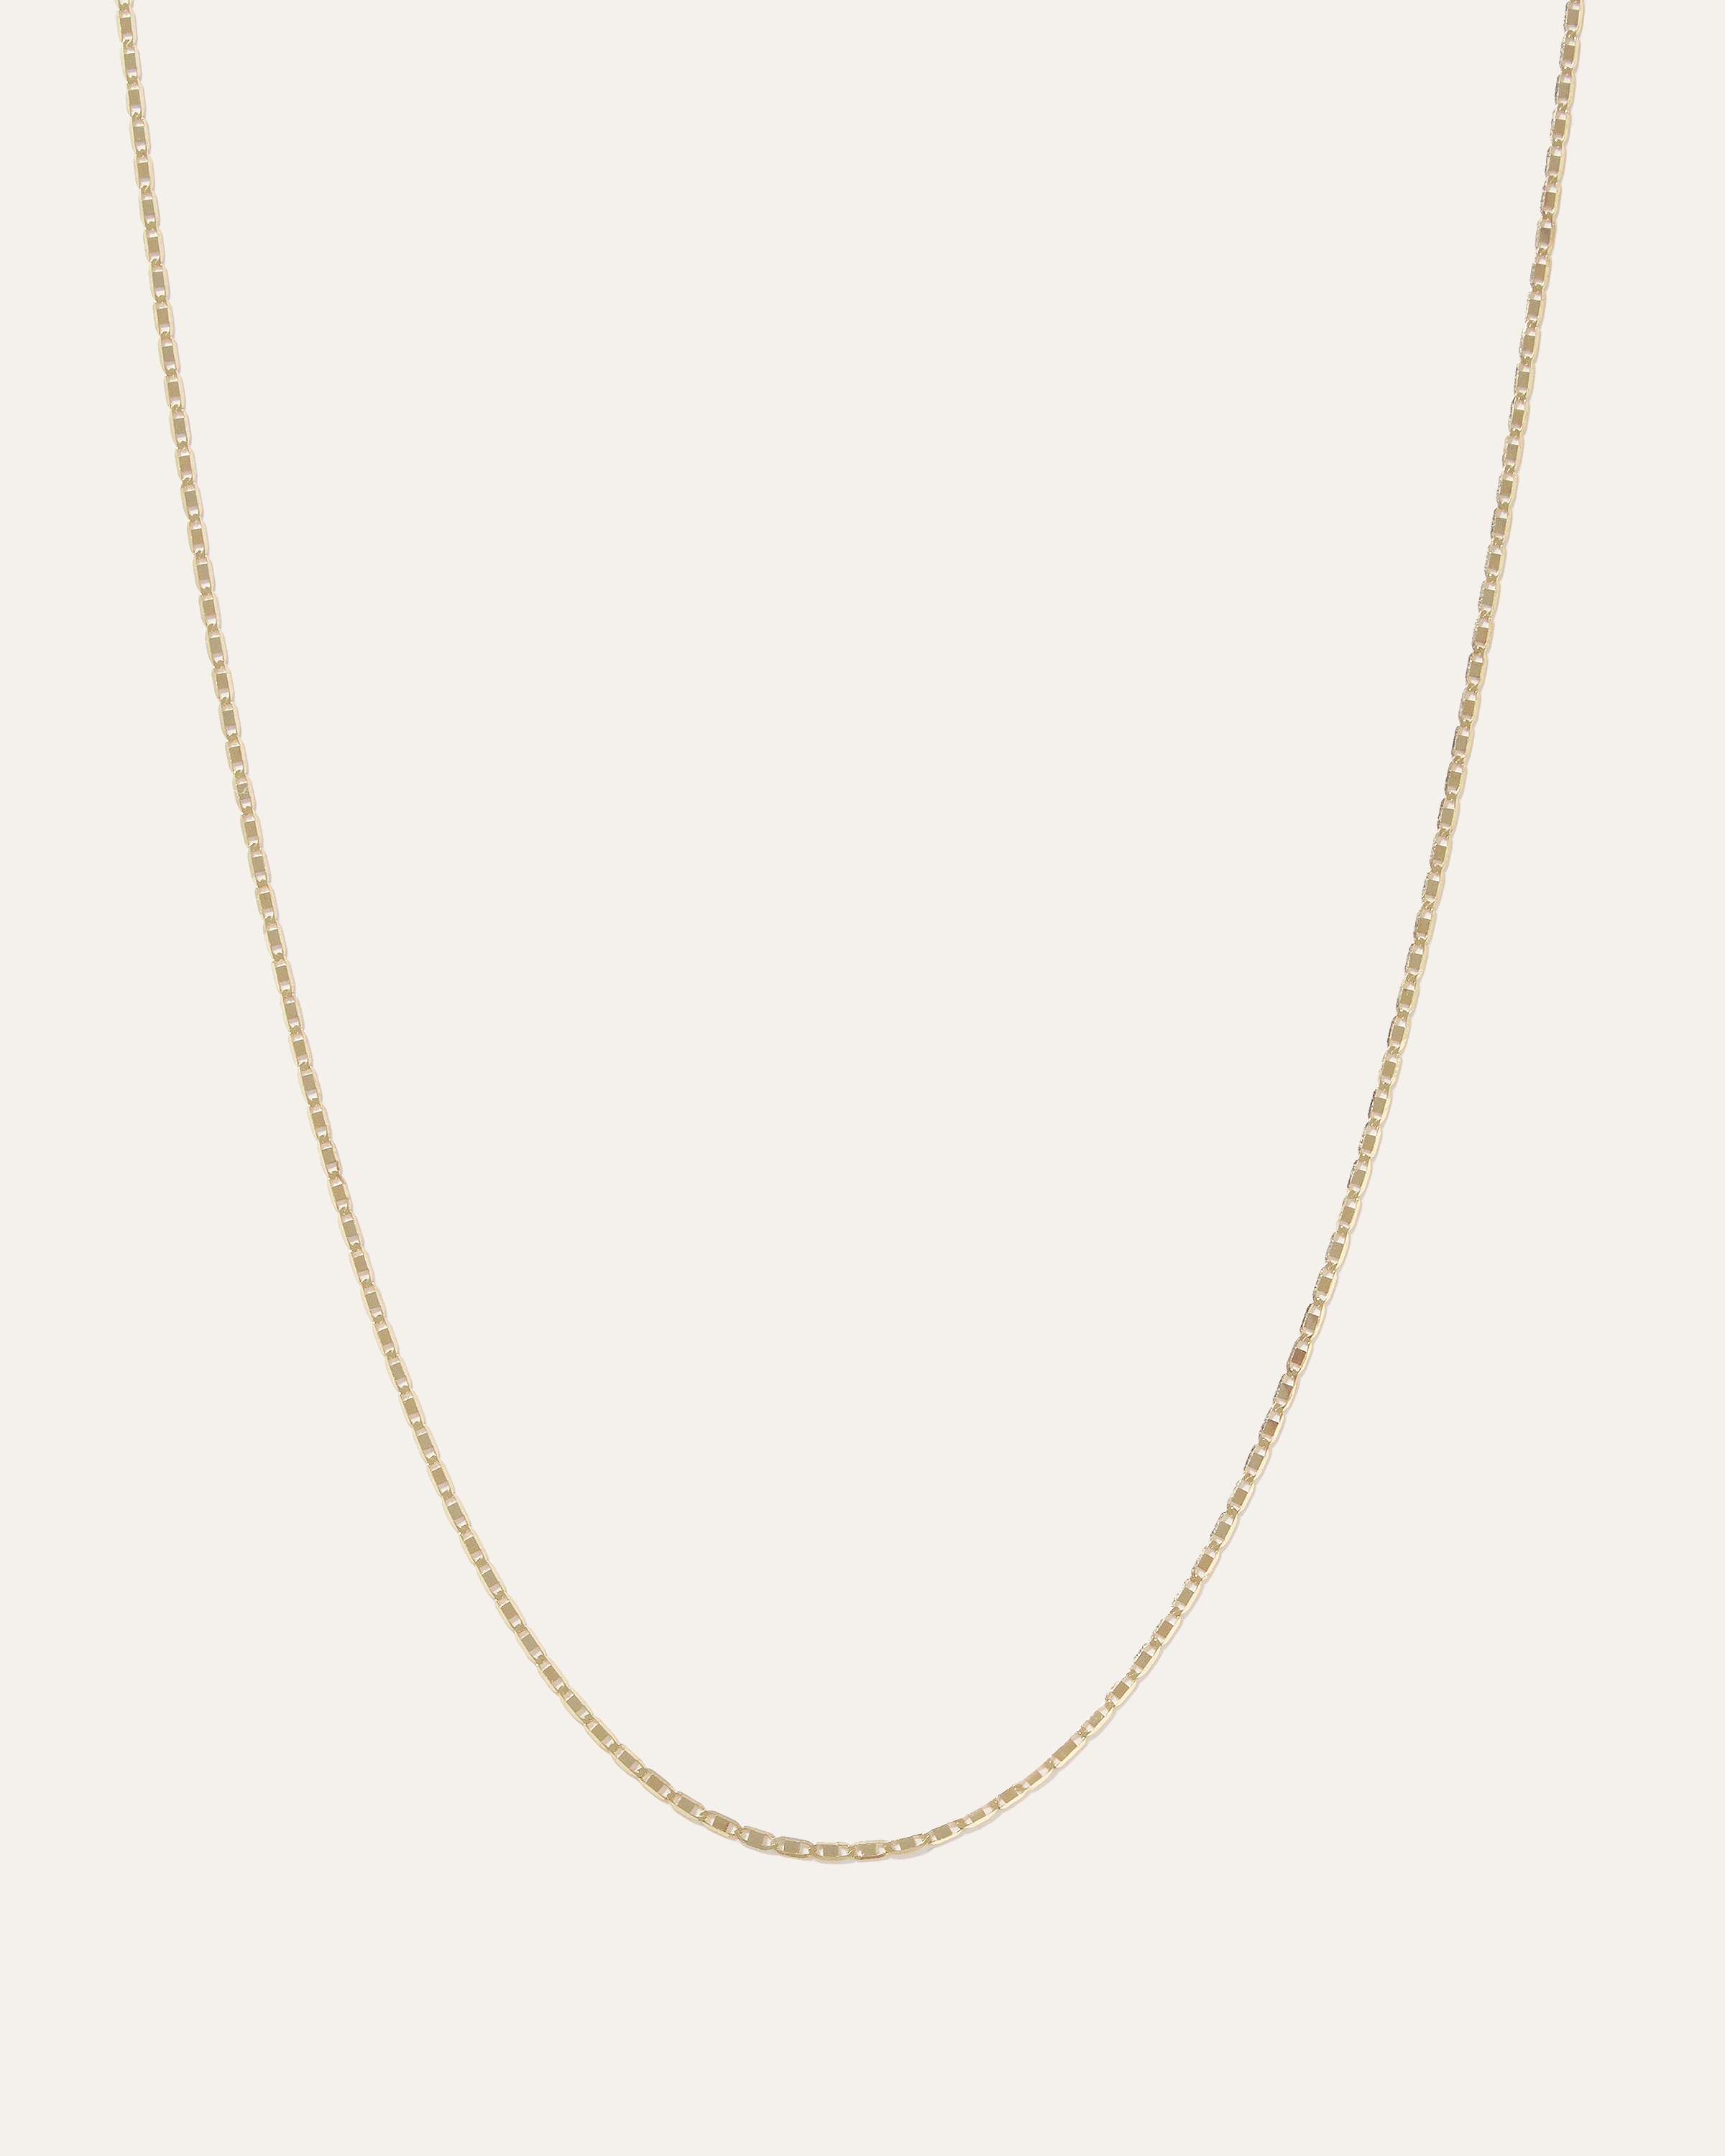 Quince Women's 14k Gold Petite Valentino Chain Necklace